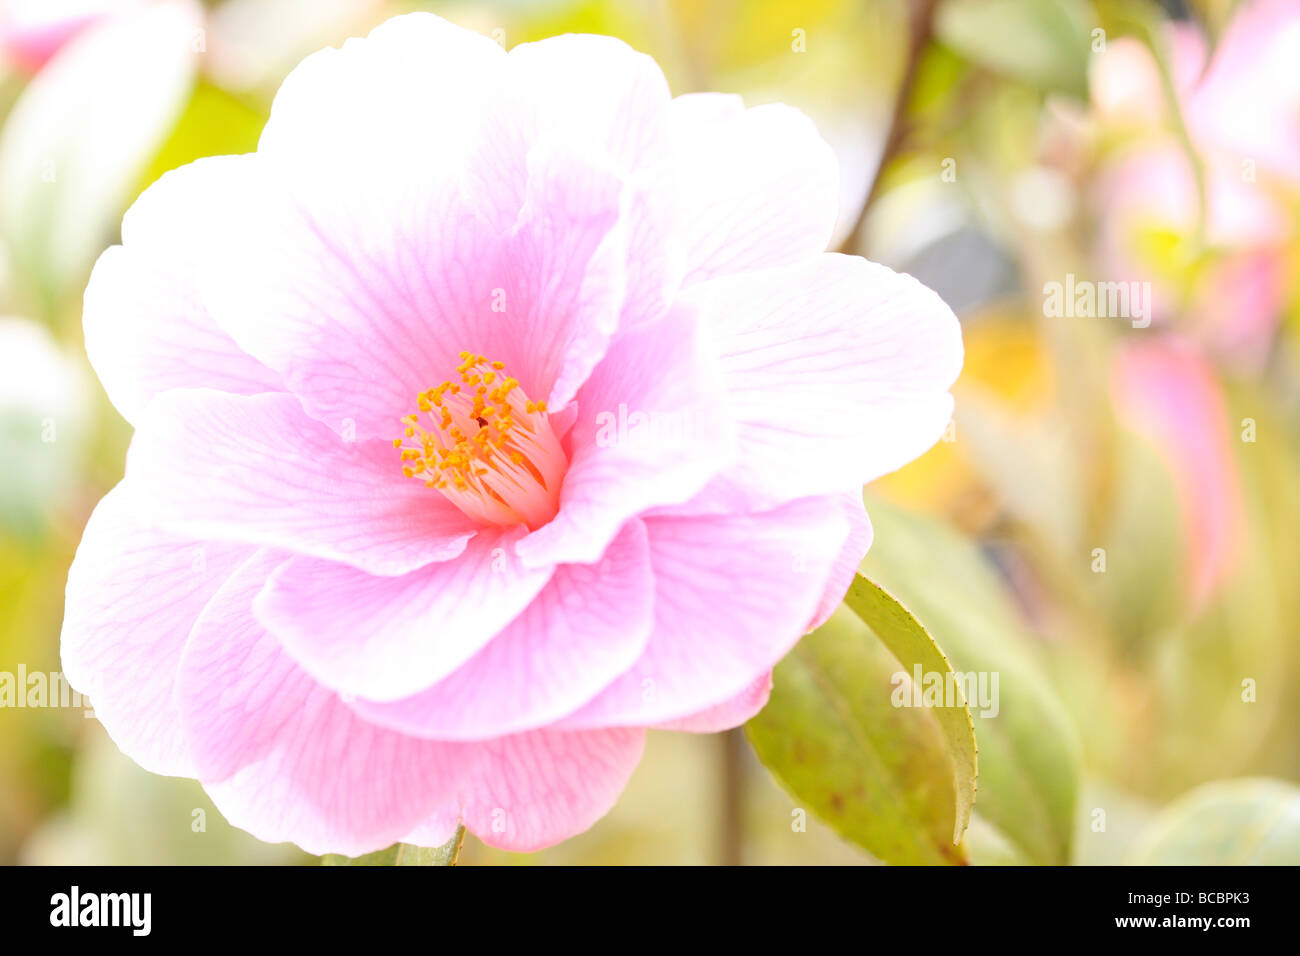 a citrus sweet touch of spring the lovely camellia fine art photography Jane Ann Butler Photography JABP484 Stock Photo